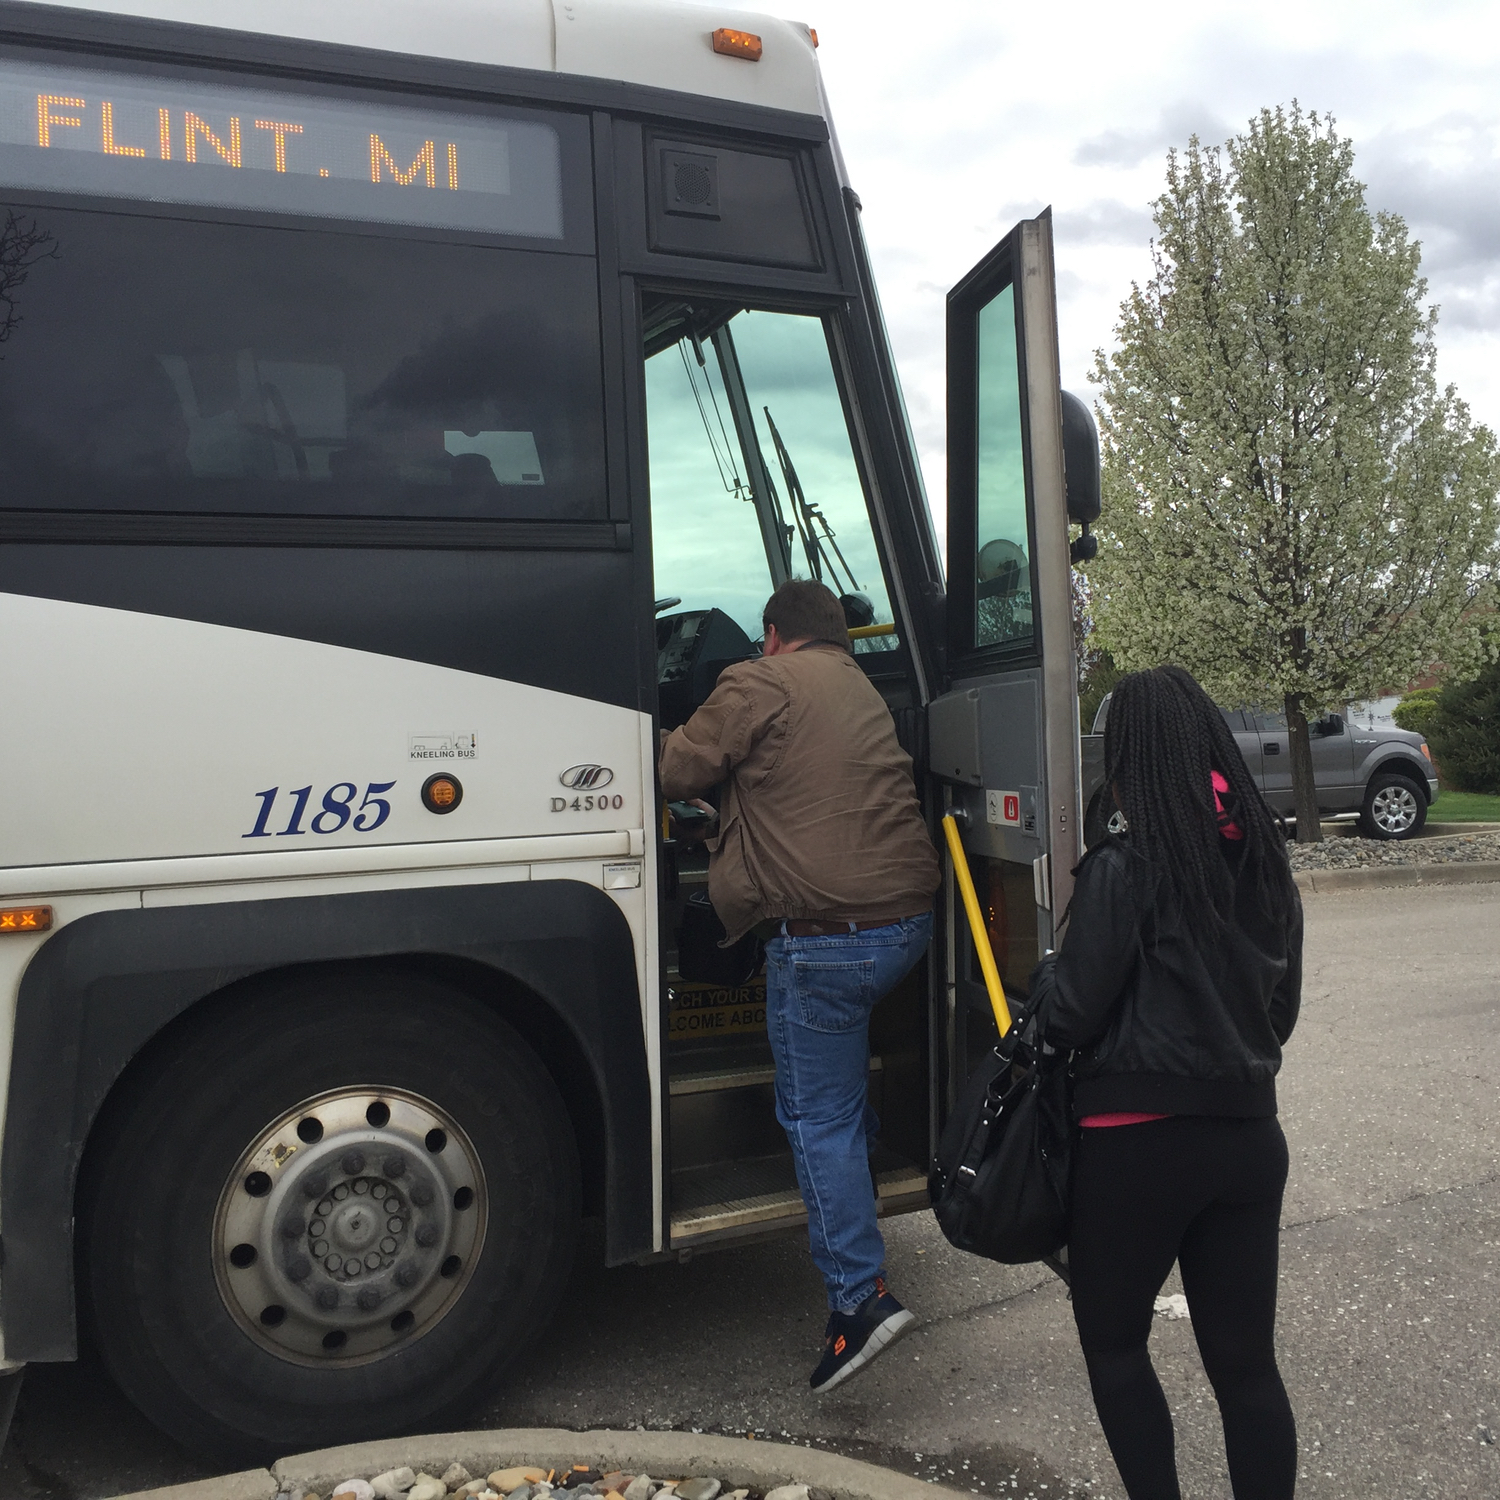 MTA Flint sends buses twice a day to Tribar Manufacturing in Howell. The bus ride is available for anyone, but typically transports employees from the Flint bus station to work at the automotive parts plant. (Bridge photo by Chastity Pratt Dawsey) 